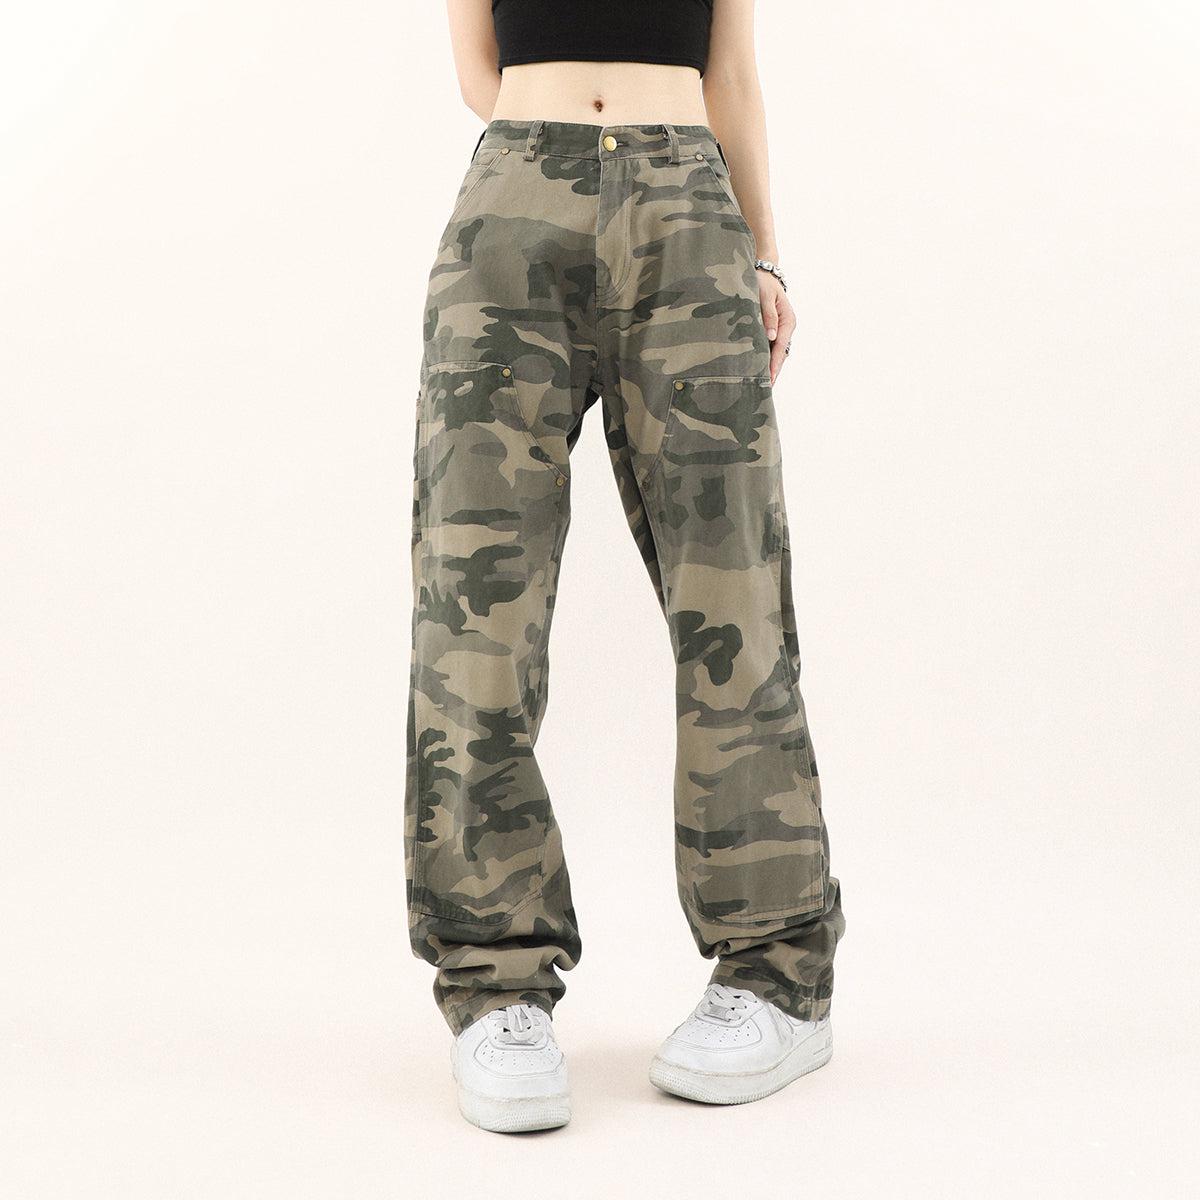 Mr Nearly Slant Pocket Camouflage Pants Korean Street Fashion Pants By Mr Nearly Shop Online at OH Vault